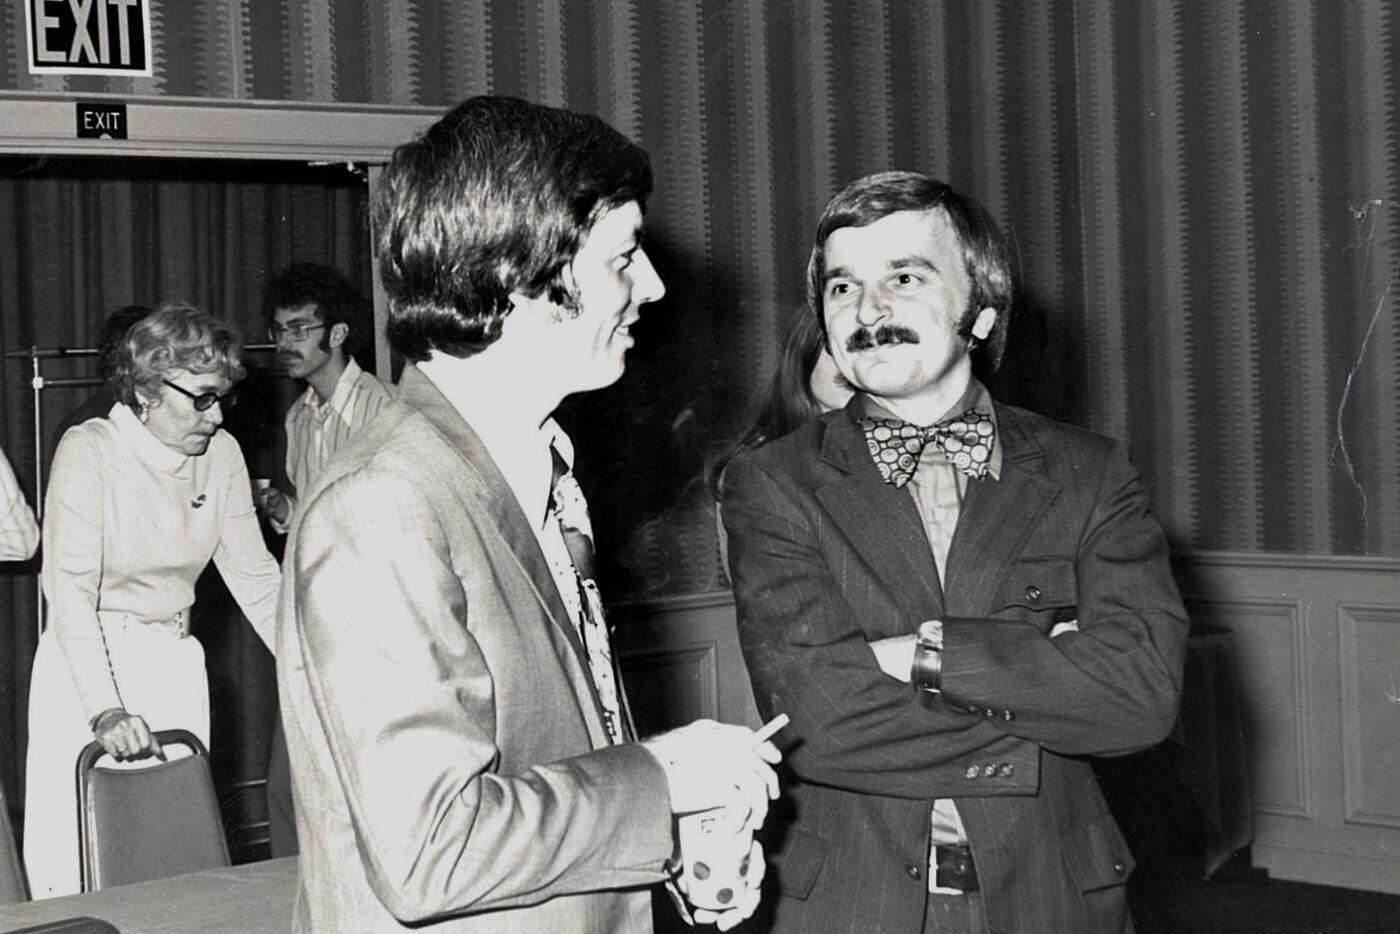 Victor Yanchick (right), Ph.D., at the University of Texas at Austin in the 1970s.